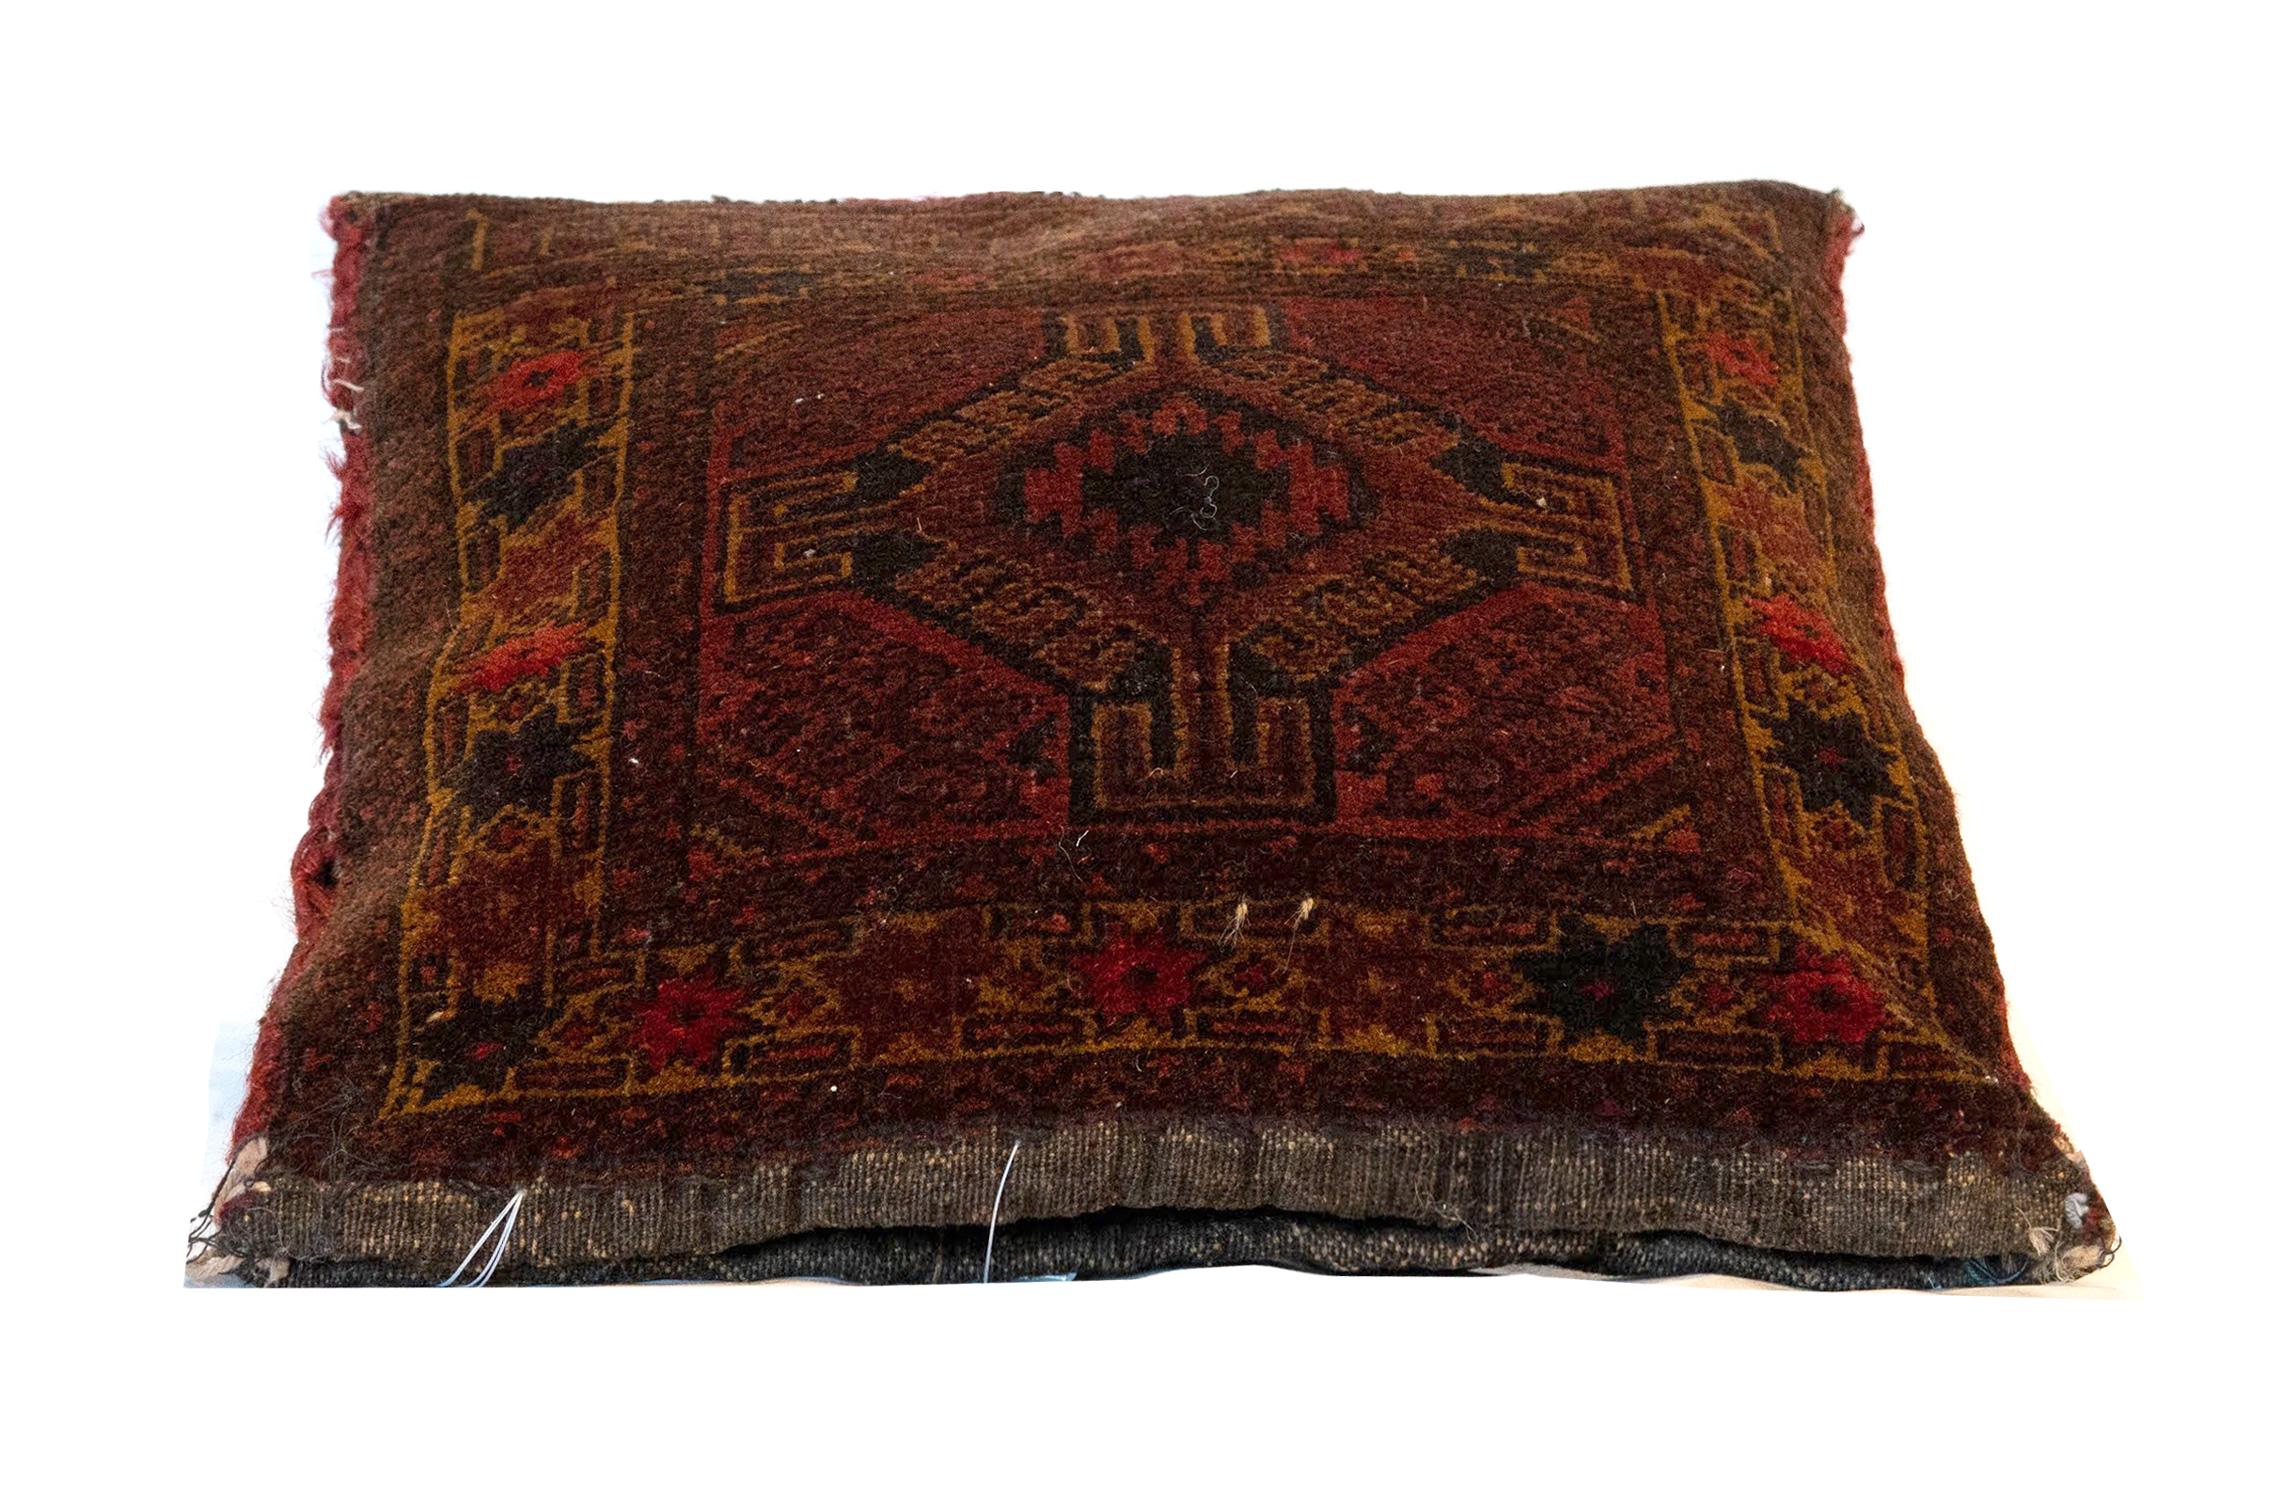 Antique wool pillowcase zipper cushion handmade Balouch Kilim pillow cover, view one of the most comprehensive collections of the decorative pillow, handmade traditional rugs, Kilim cushions cover Furniture, with worldwide delivery. Our Gallery